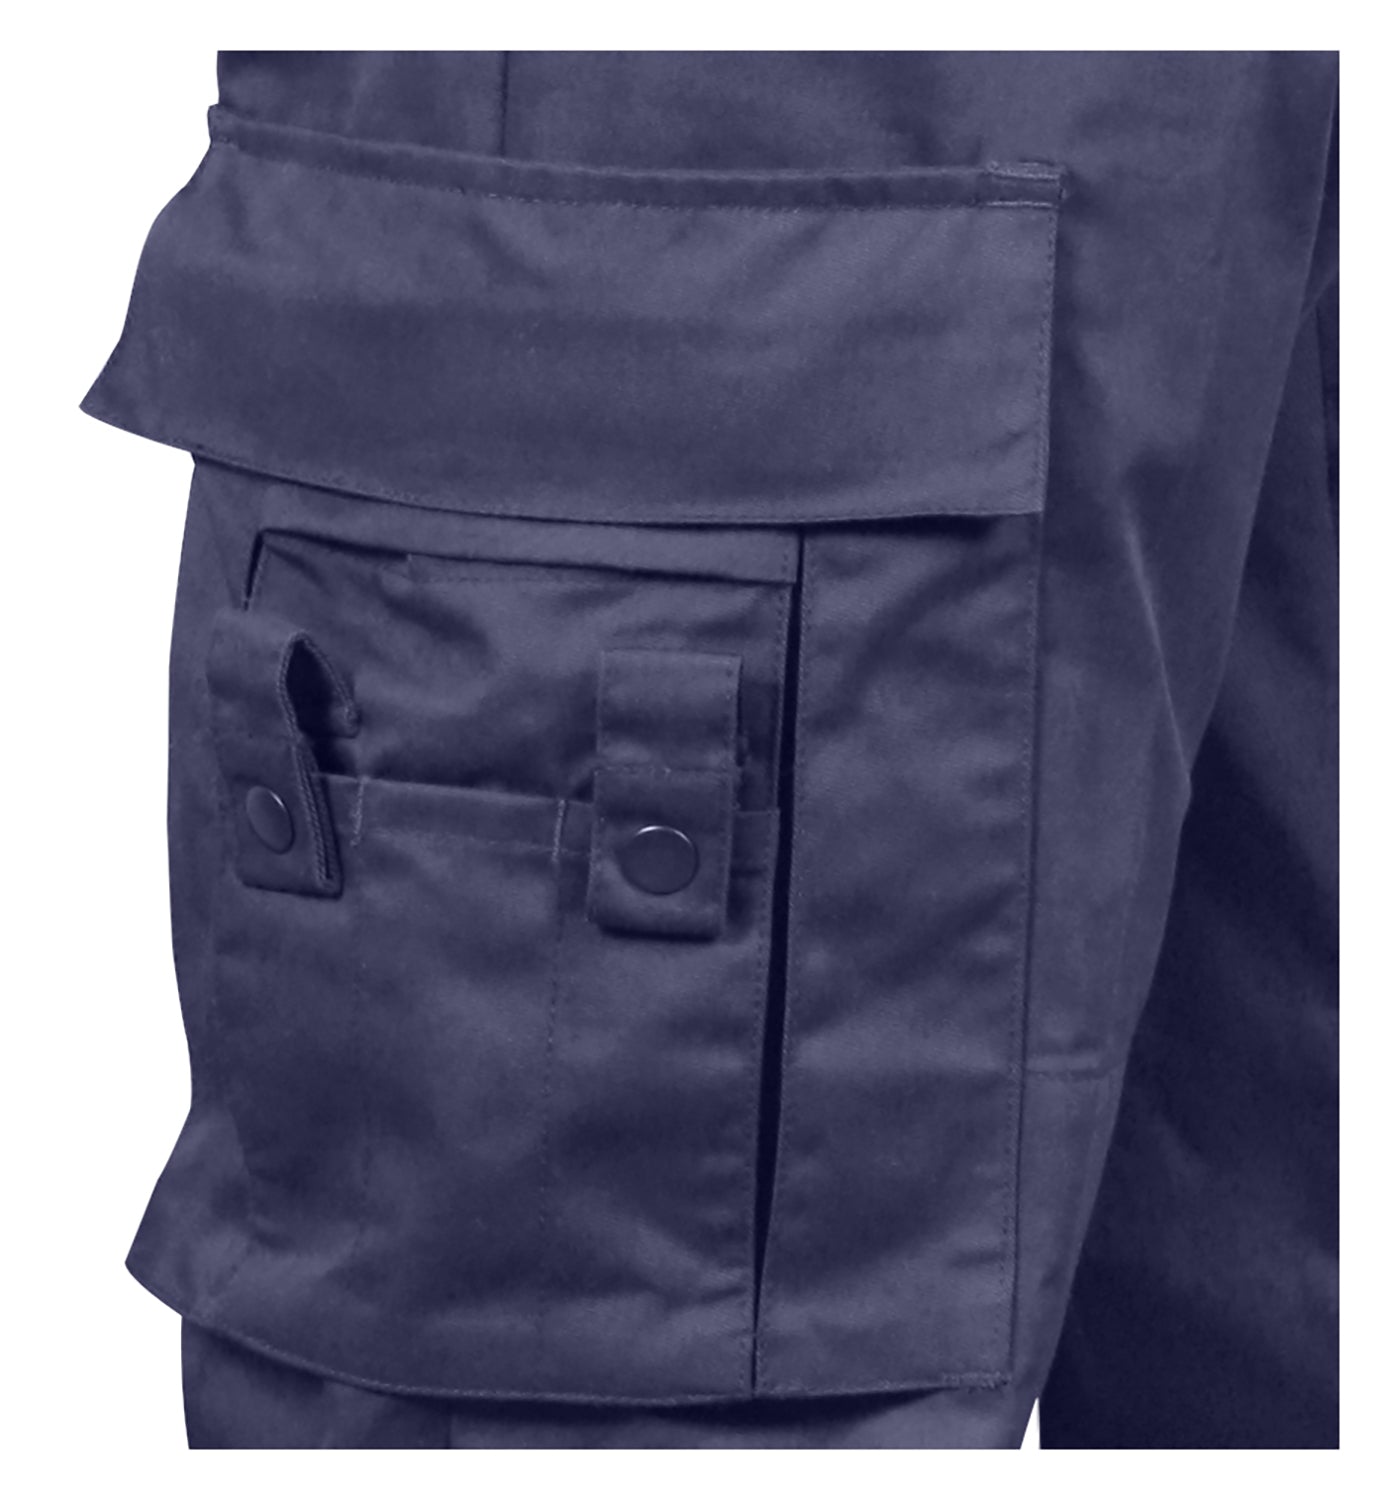 Rothco Men's Deluxe EMT EMS Pants